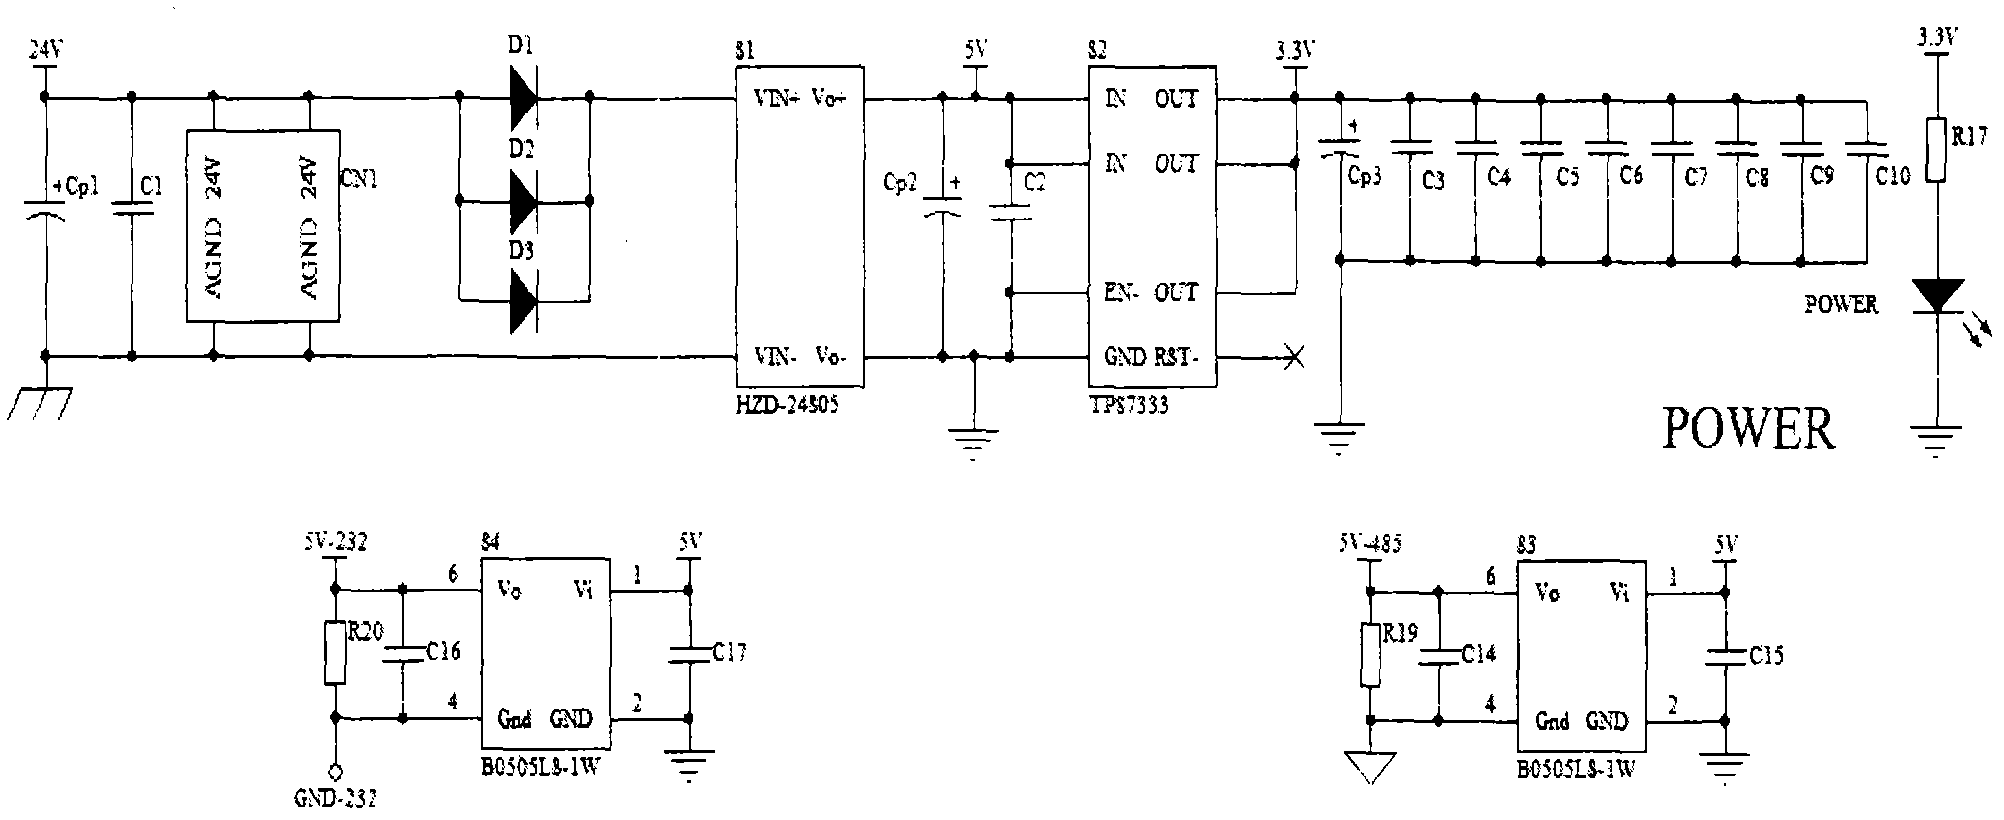 Radio-frequency switching unit control method based on ARM (advanced reduced instruction set computer machine) and DSP (digital signal processor)